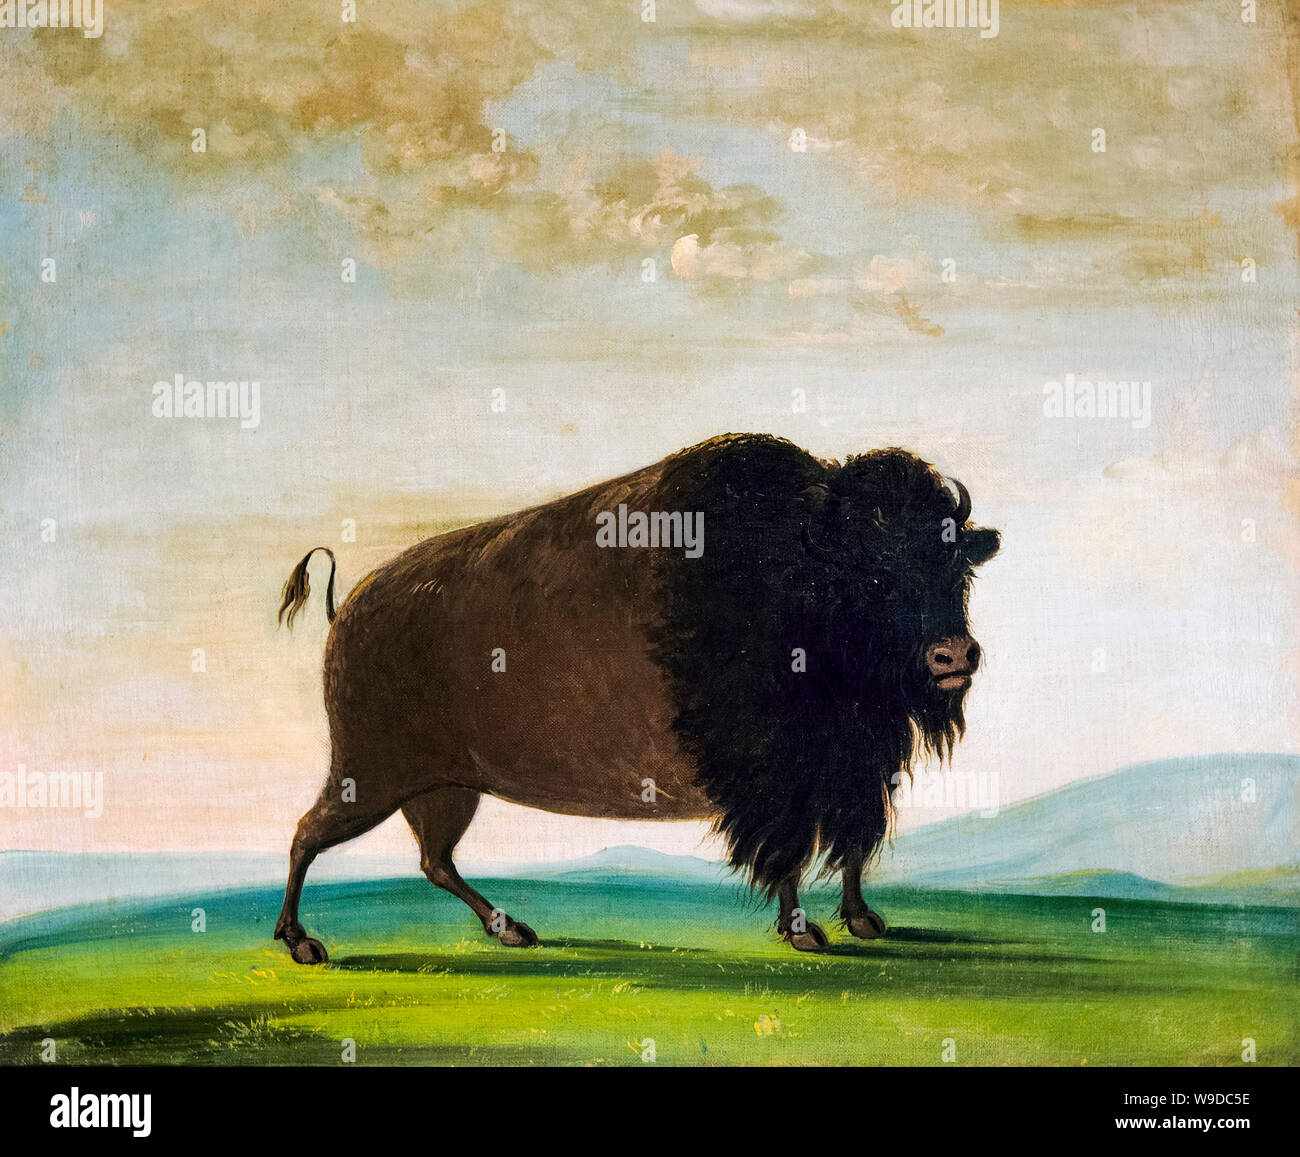 George Catlin, Buffalo cow Grazing on the Prairie, peinture, 1832-1833 Banque D'Images